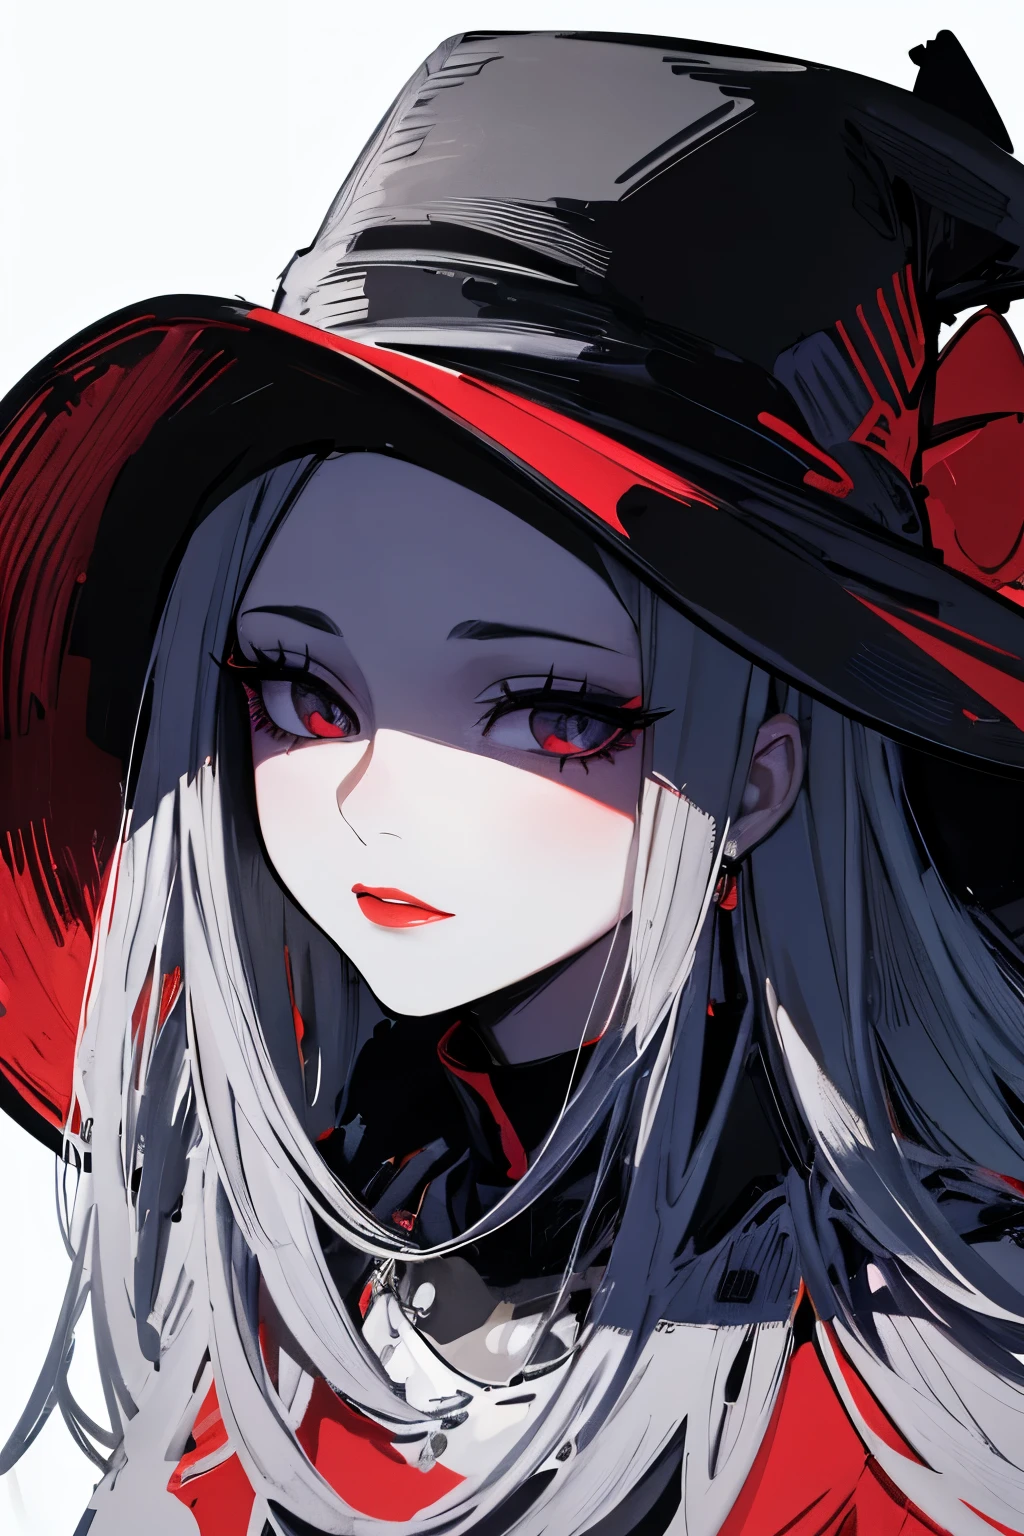 (Elegant, High Quality, Ultra-Detailed), 1 Woman, Portrait, Extremely Detailed Hands, (Noir Chic: 1.1), (Abstract Art: 1.1), Red and Black Color Scheme, Most Detailed

[Woman in Red Lipstick and Black Hat]

With a solid black background as her canvas, an elegant woman adorned in red lipstick and a black hat with the brim concealing her eyes makes a striking silhouette. The brim of her hat, casting a shadow over her eyes, adds a mystique to her demeanor, suggesting a hidden persona underlying her poised exterior.

Her long